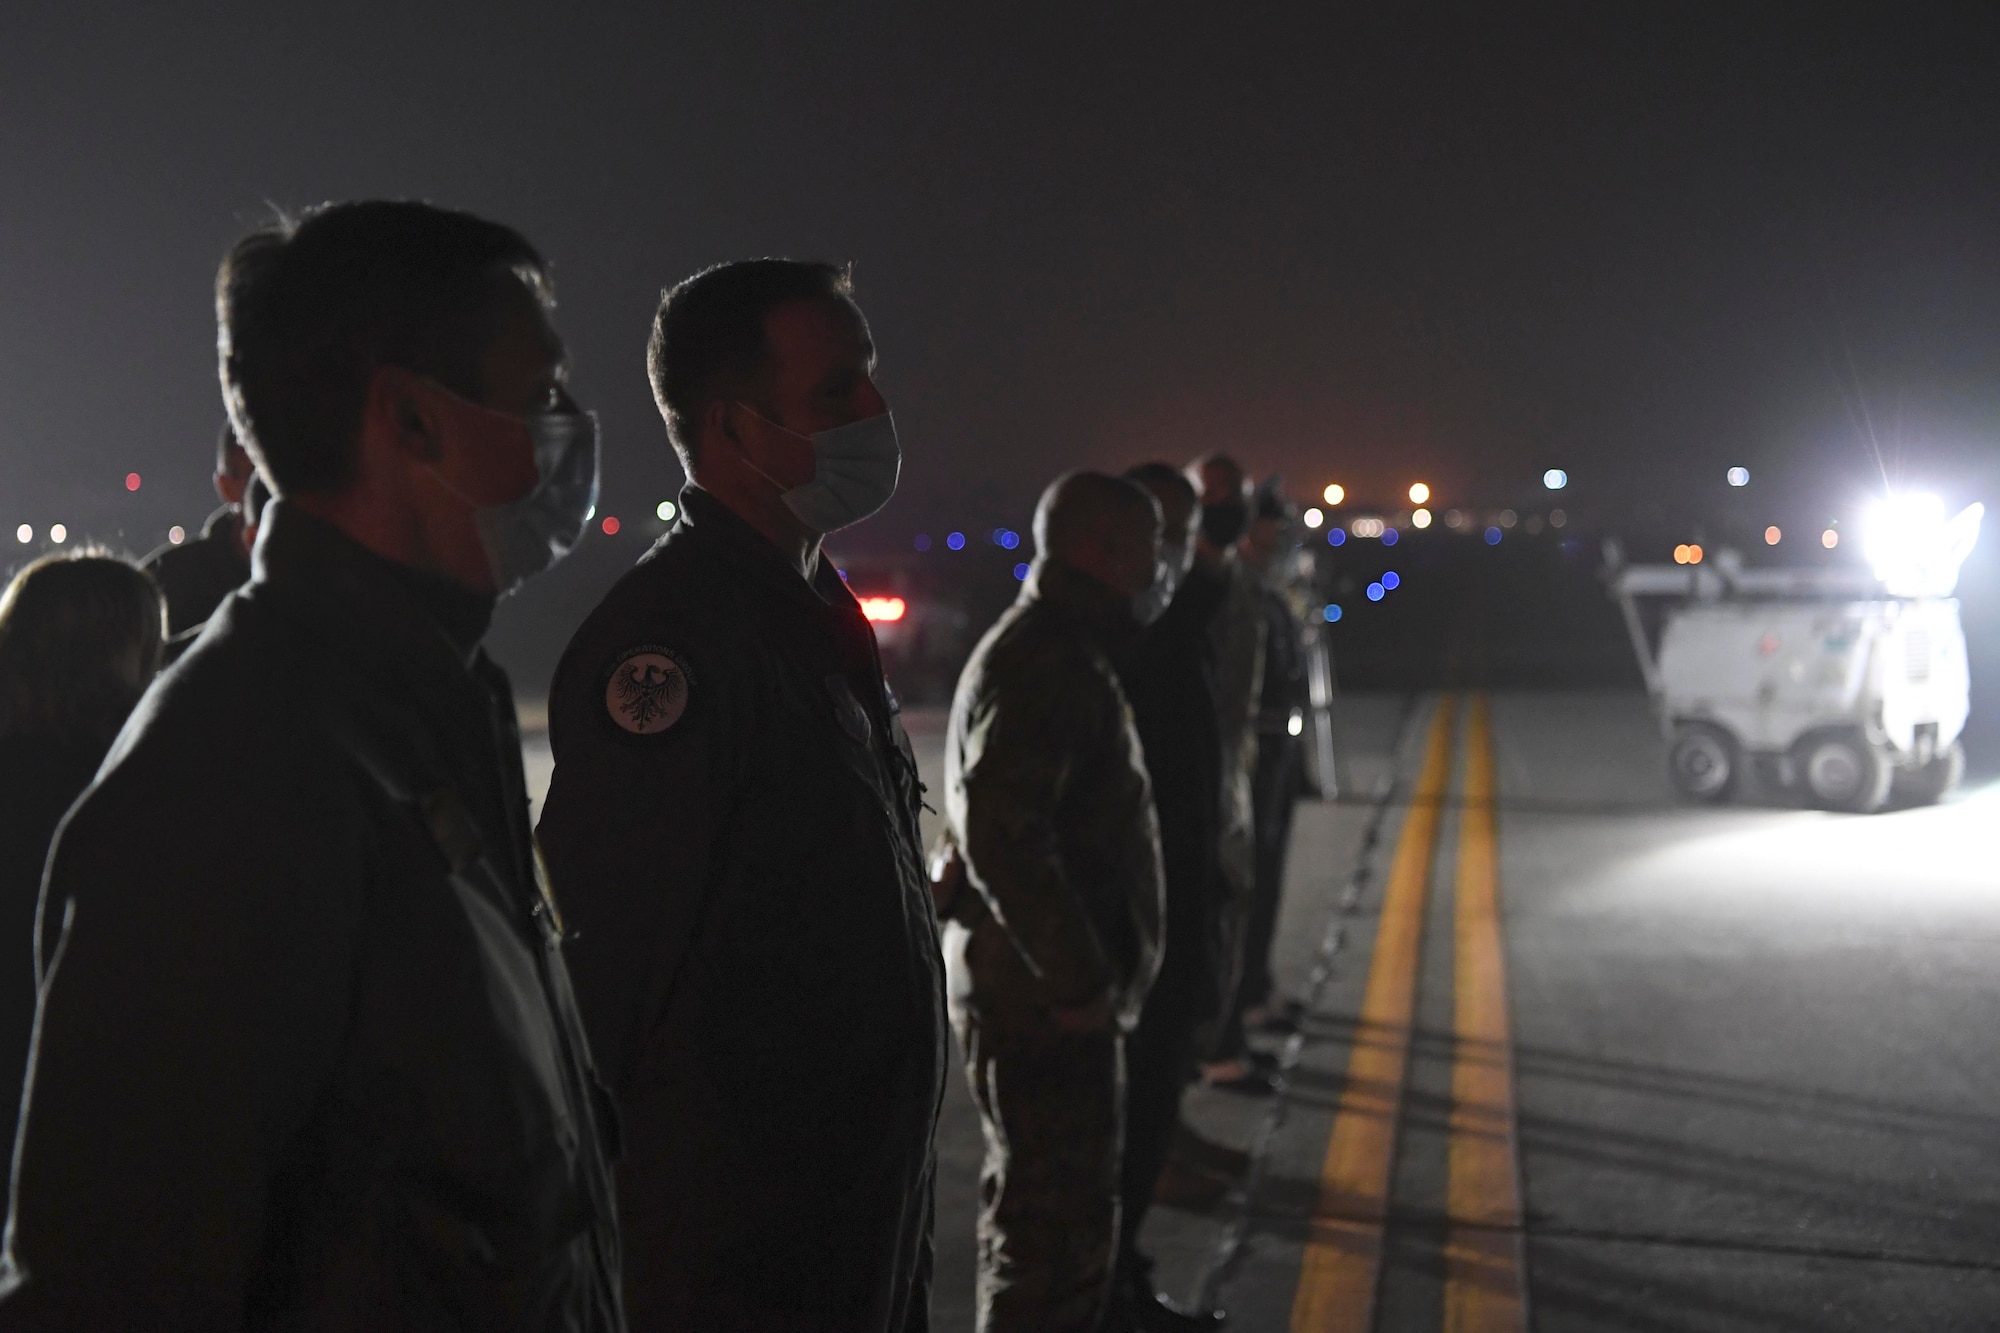 During their visit, they connected with Airmen and toured Aviano Air Base to emphasize the importance of the 31st Fighter Wing’s mission.